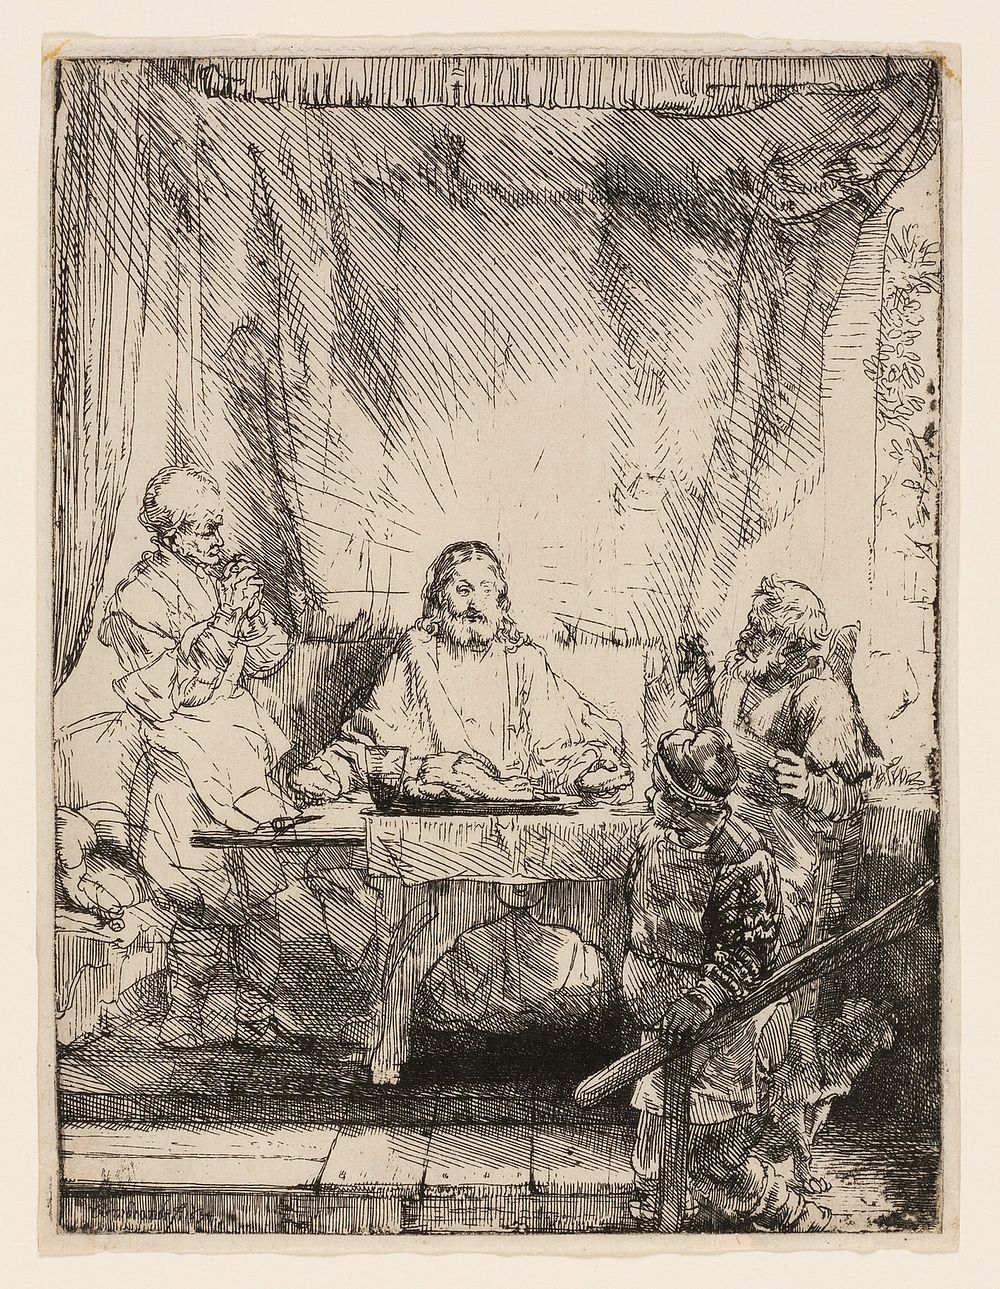 Christ at Emmaus: The Larger Plate by Rembrandt van Rijn